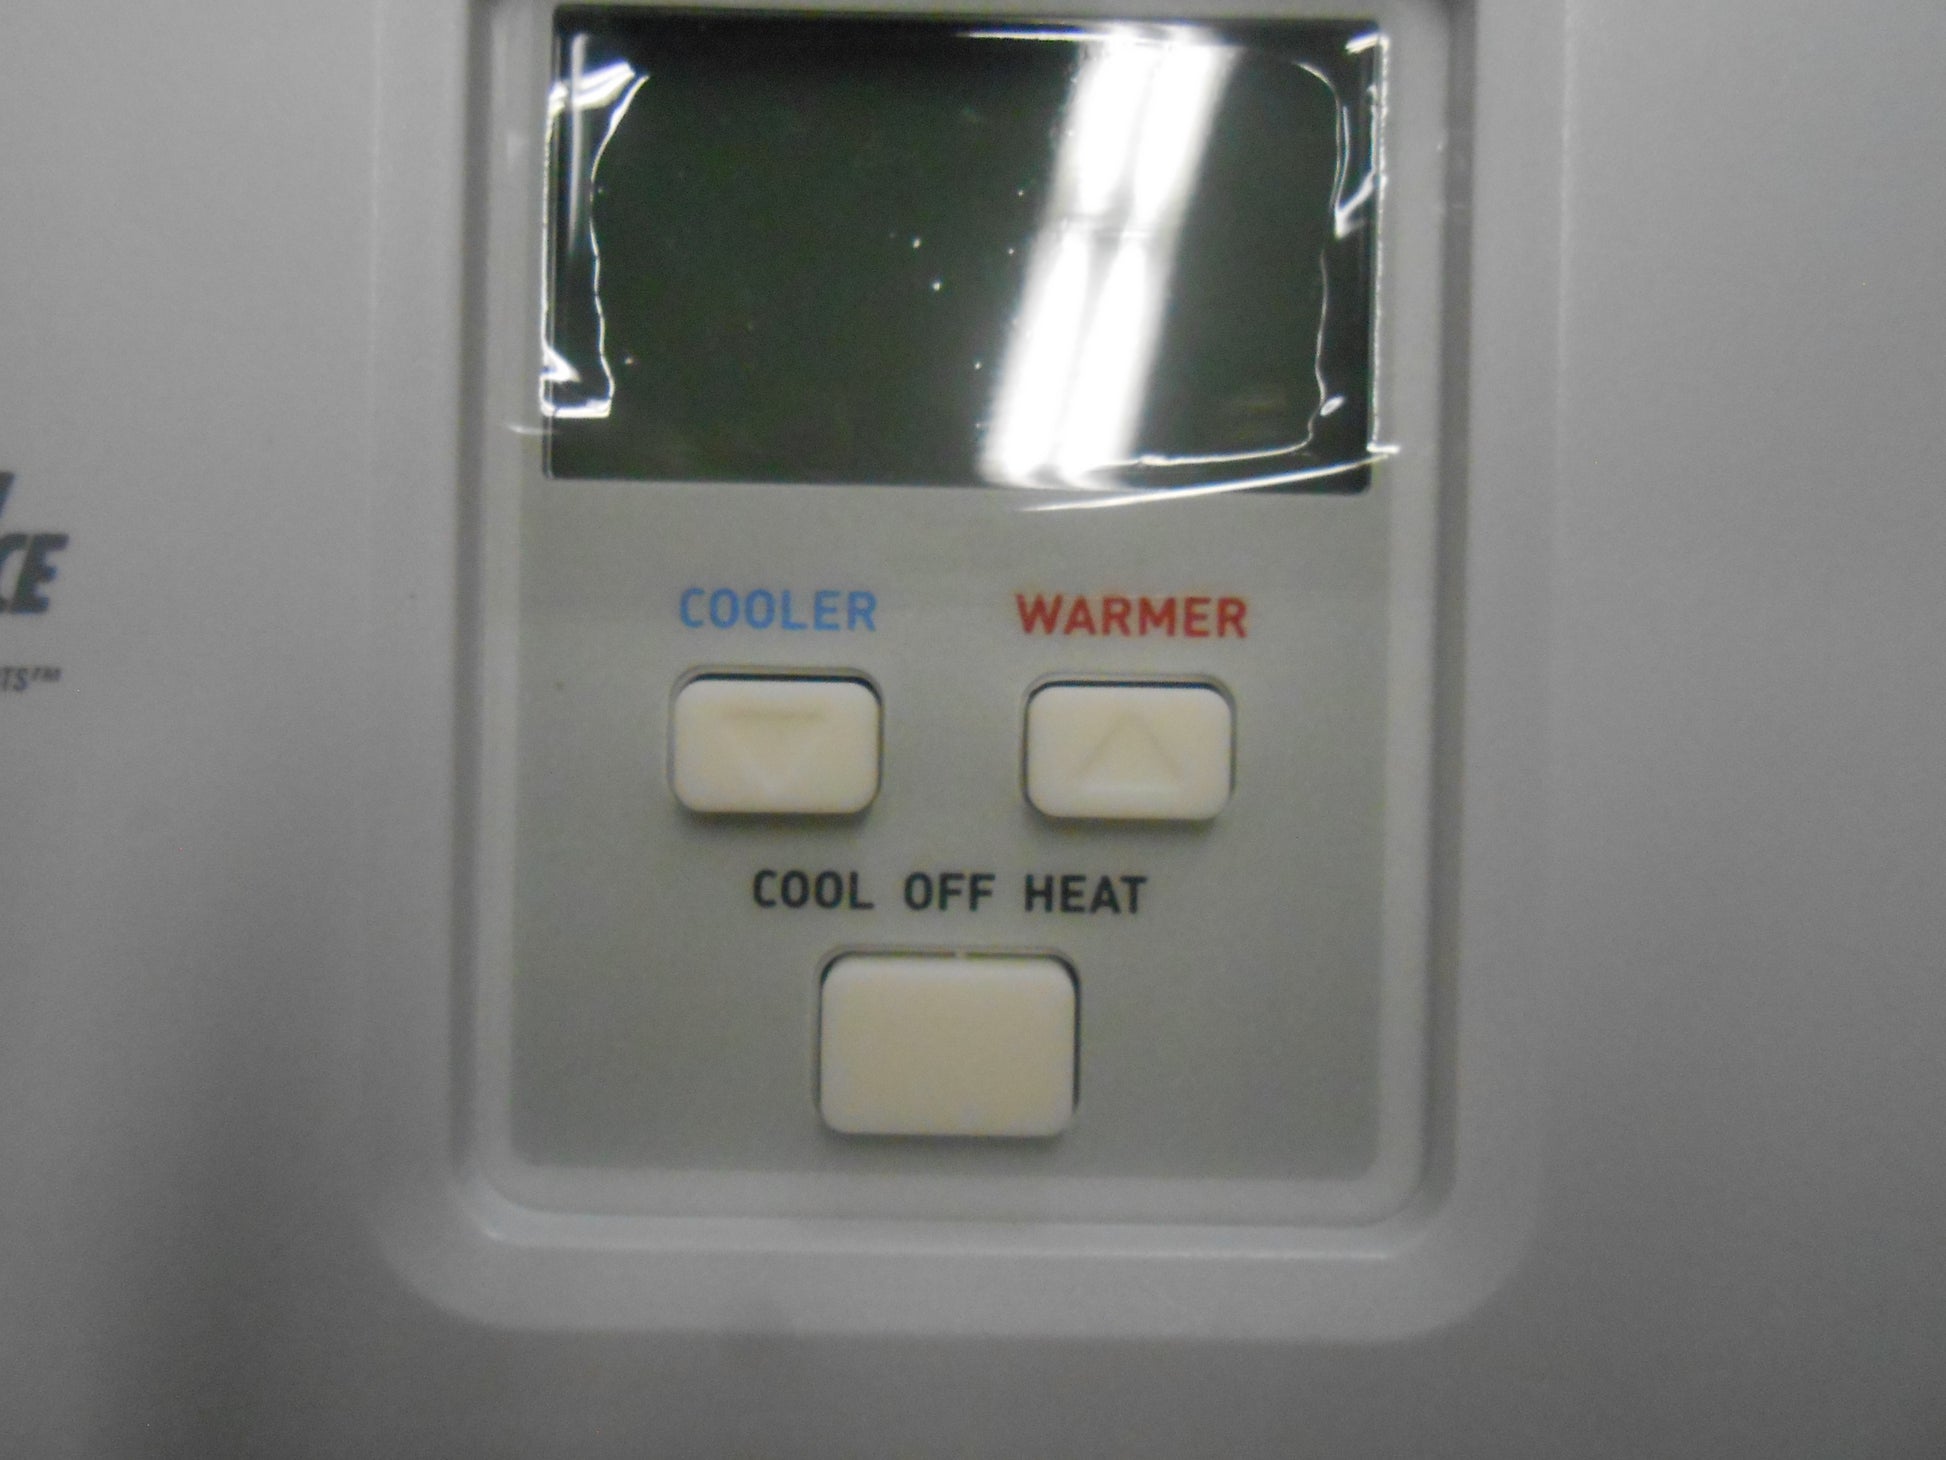 2 HEAT/2 COOL 7 DAY PROGRAMMABLE DIGITAL THERMOSTAT